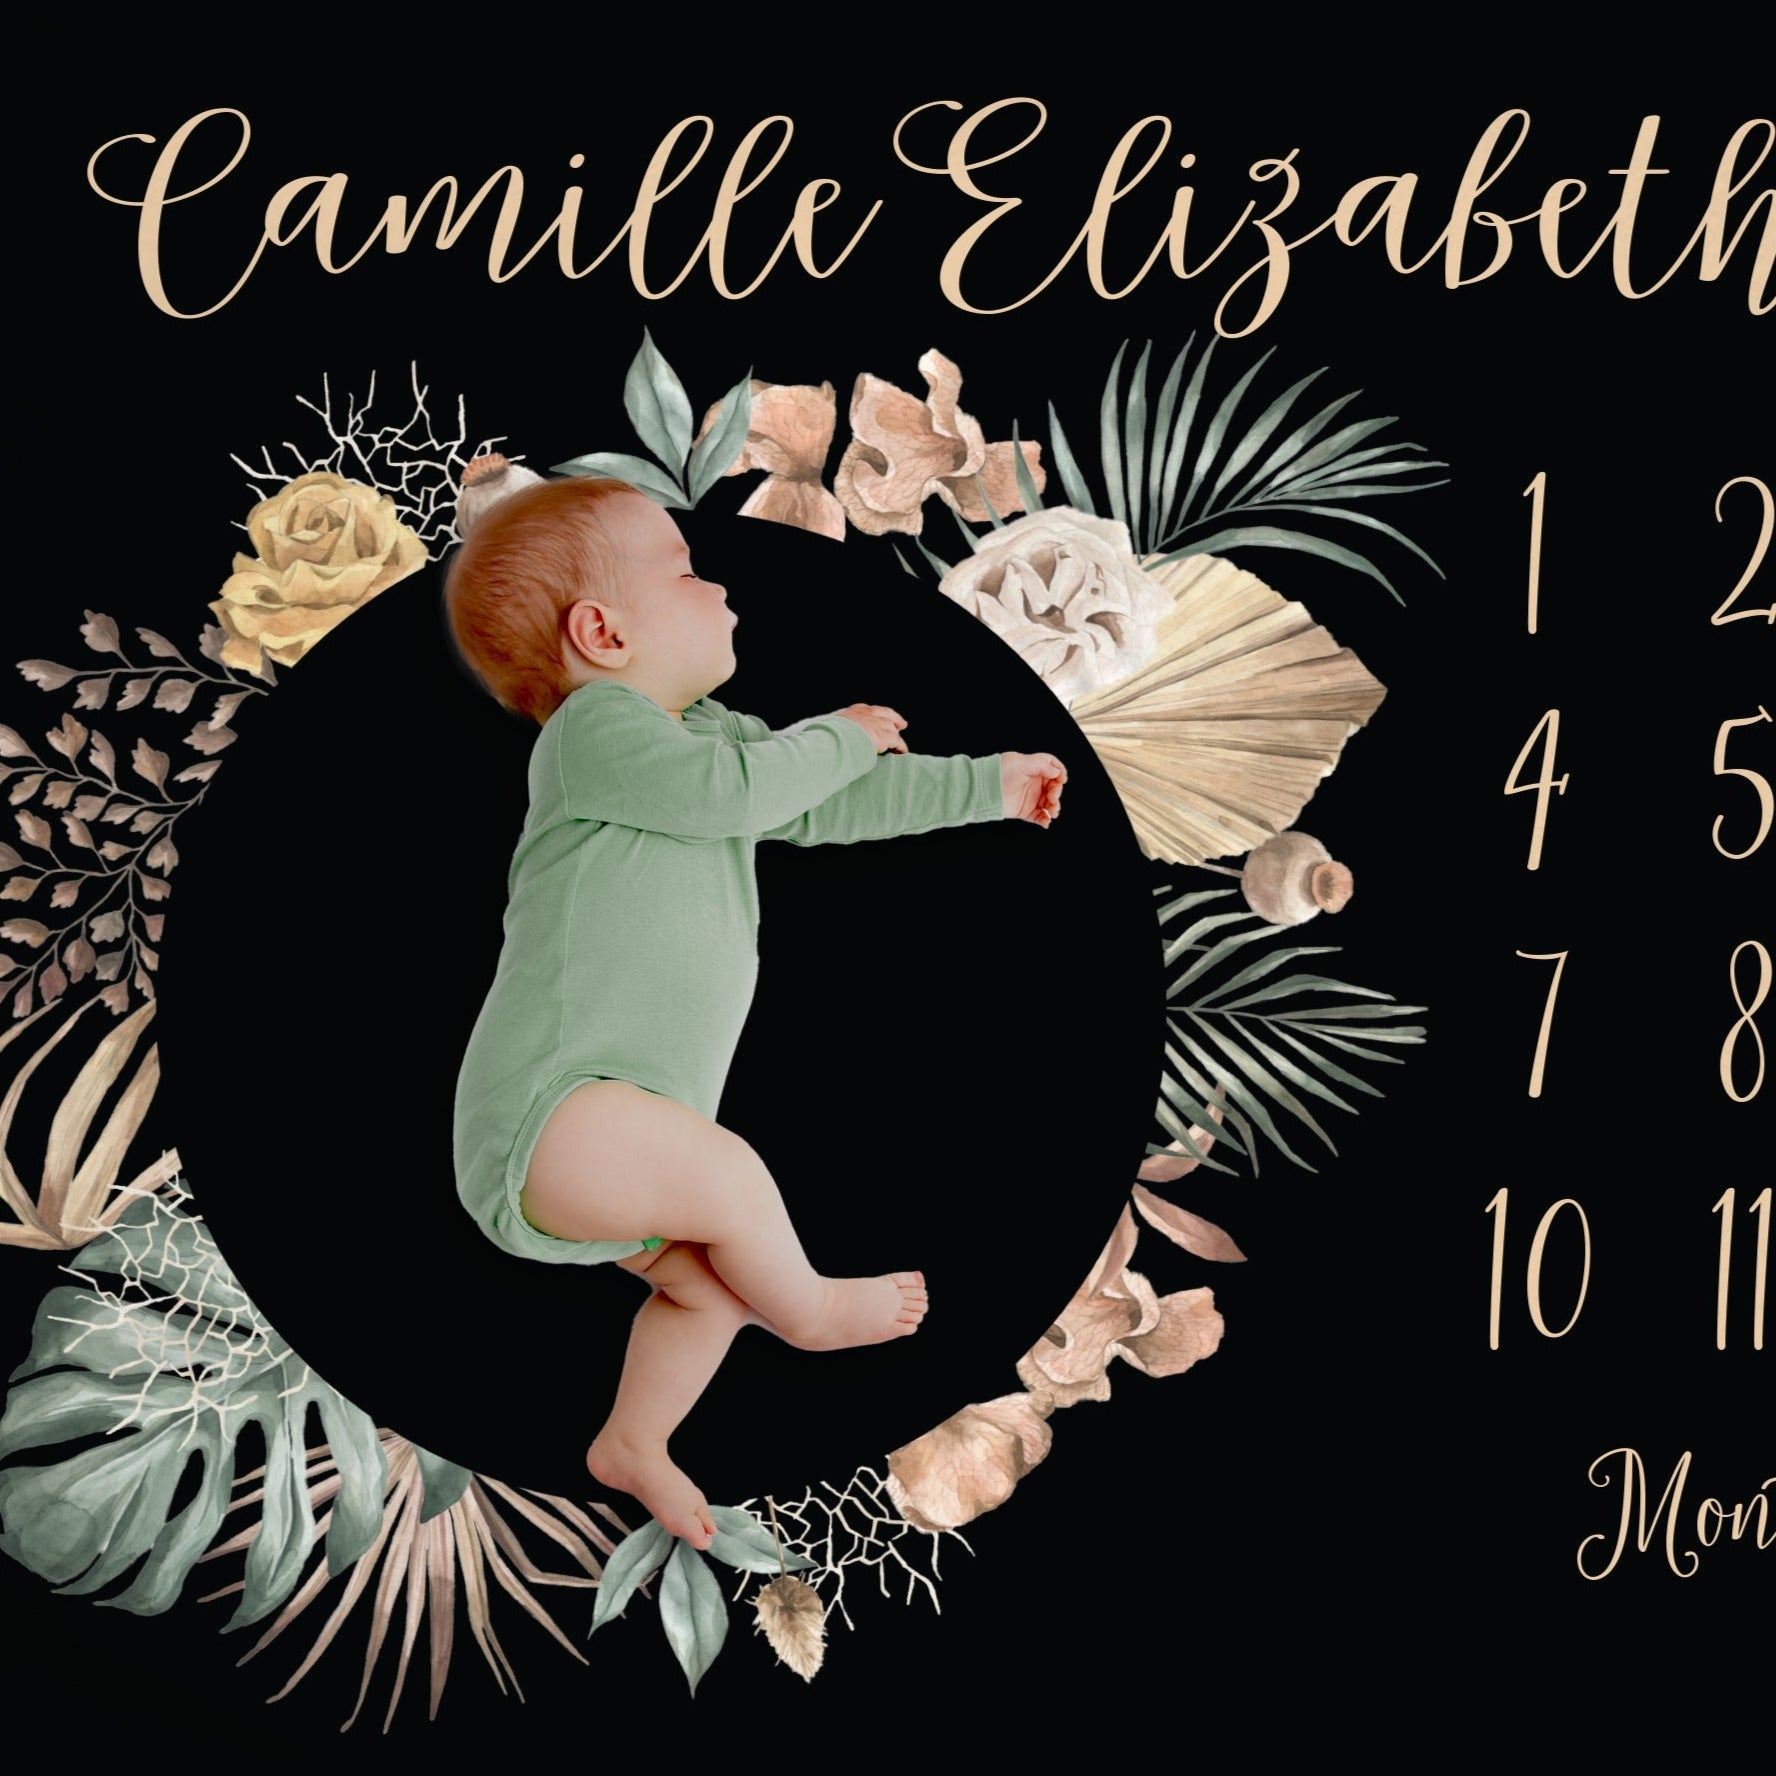 Bold Tropical Floral milestone blanket, black background with beige text